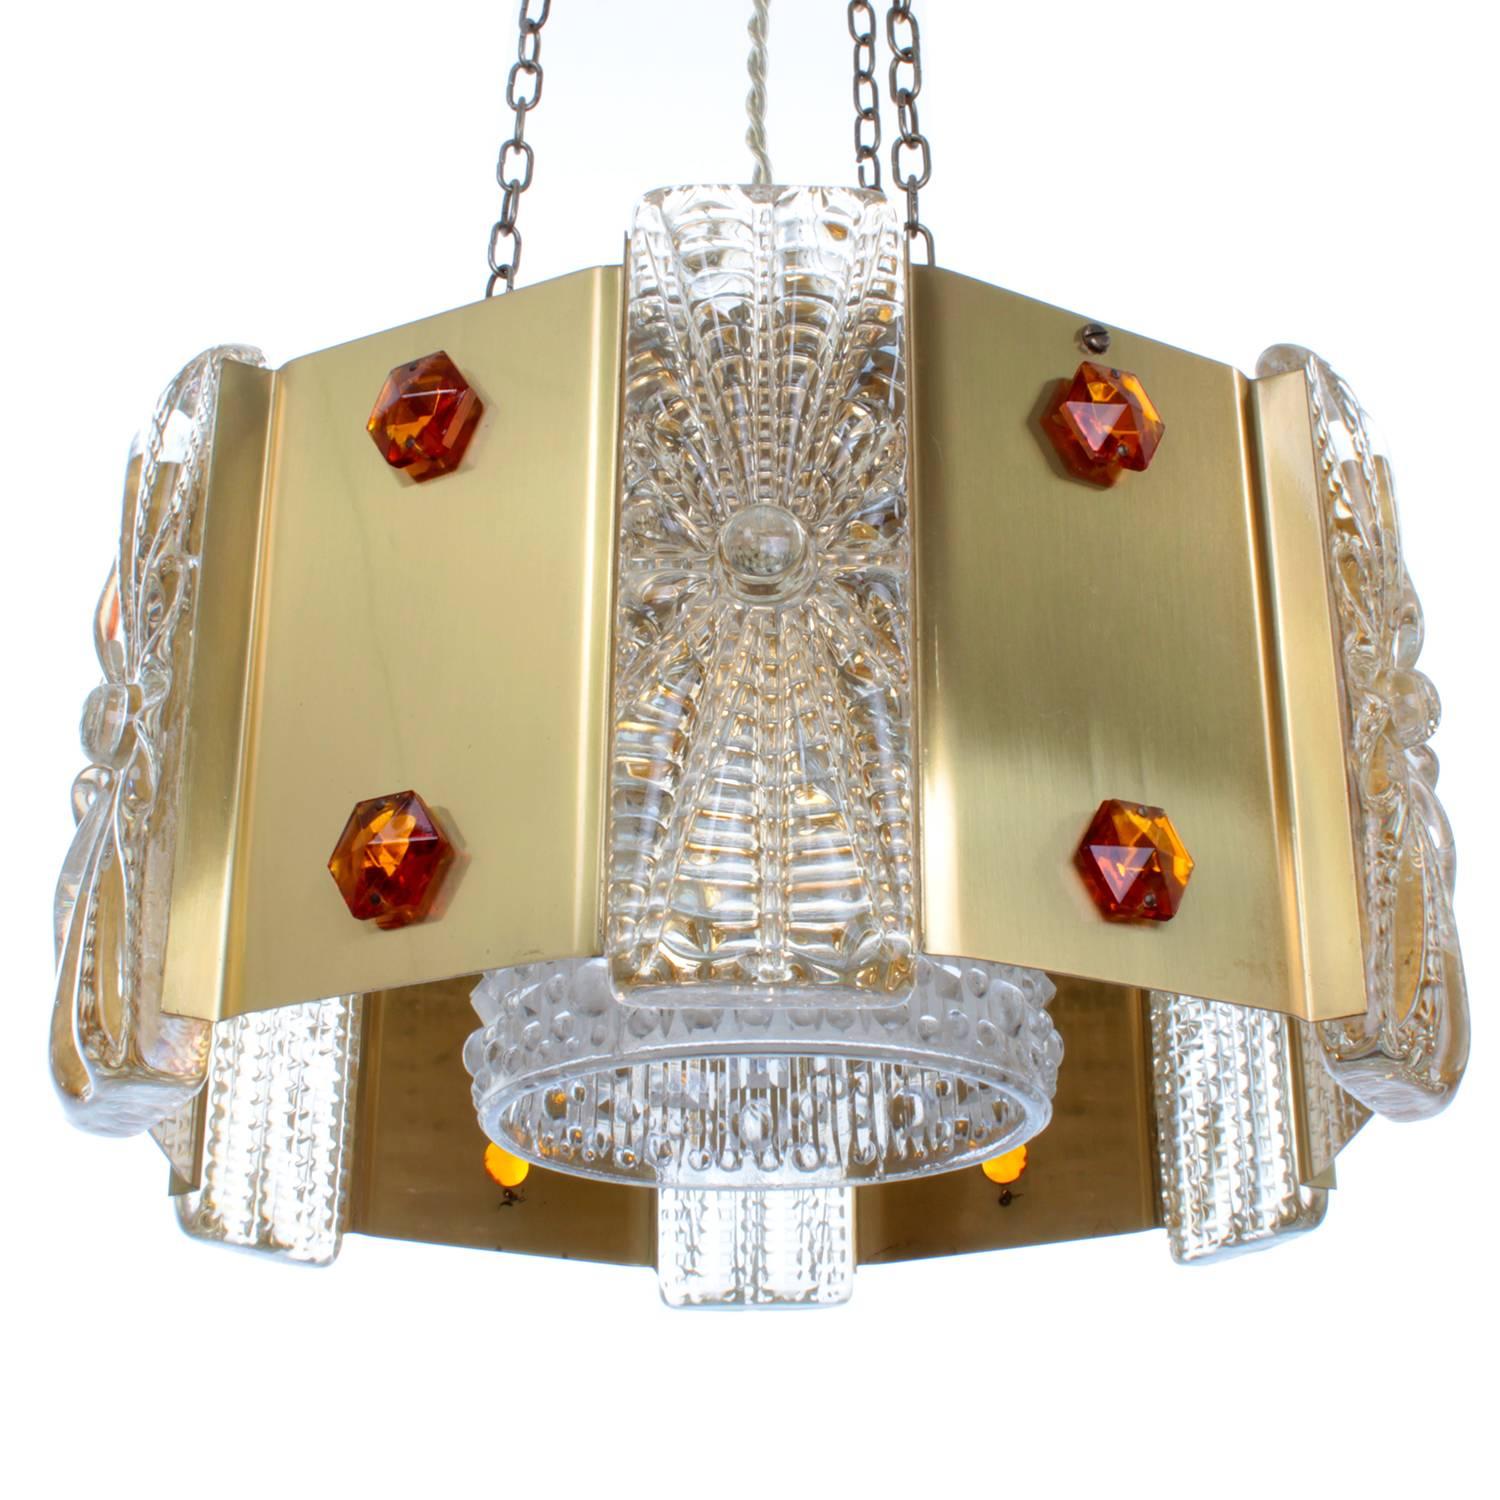 Hollywood Regency Prism Pendant by Vitrika, 1970s Brass Ceiling Light with Pressed Glass For Sale